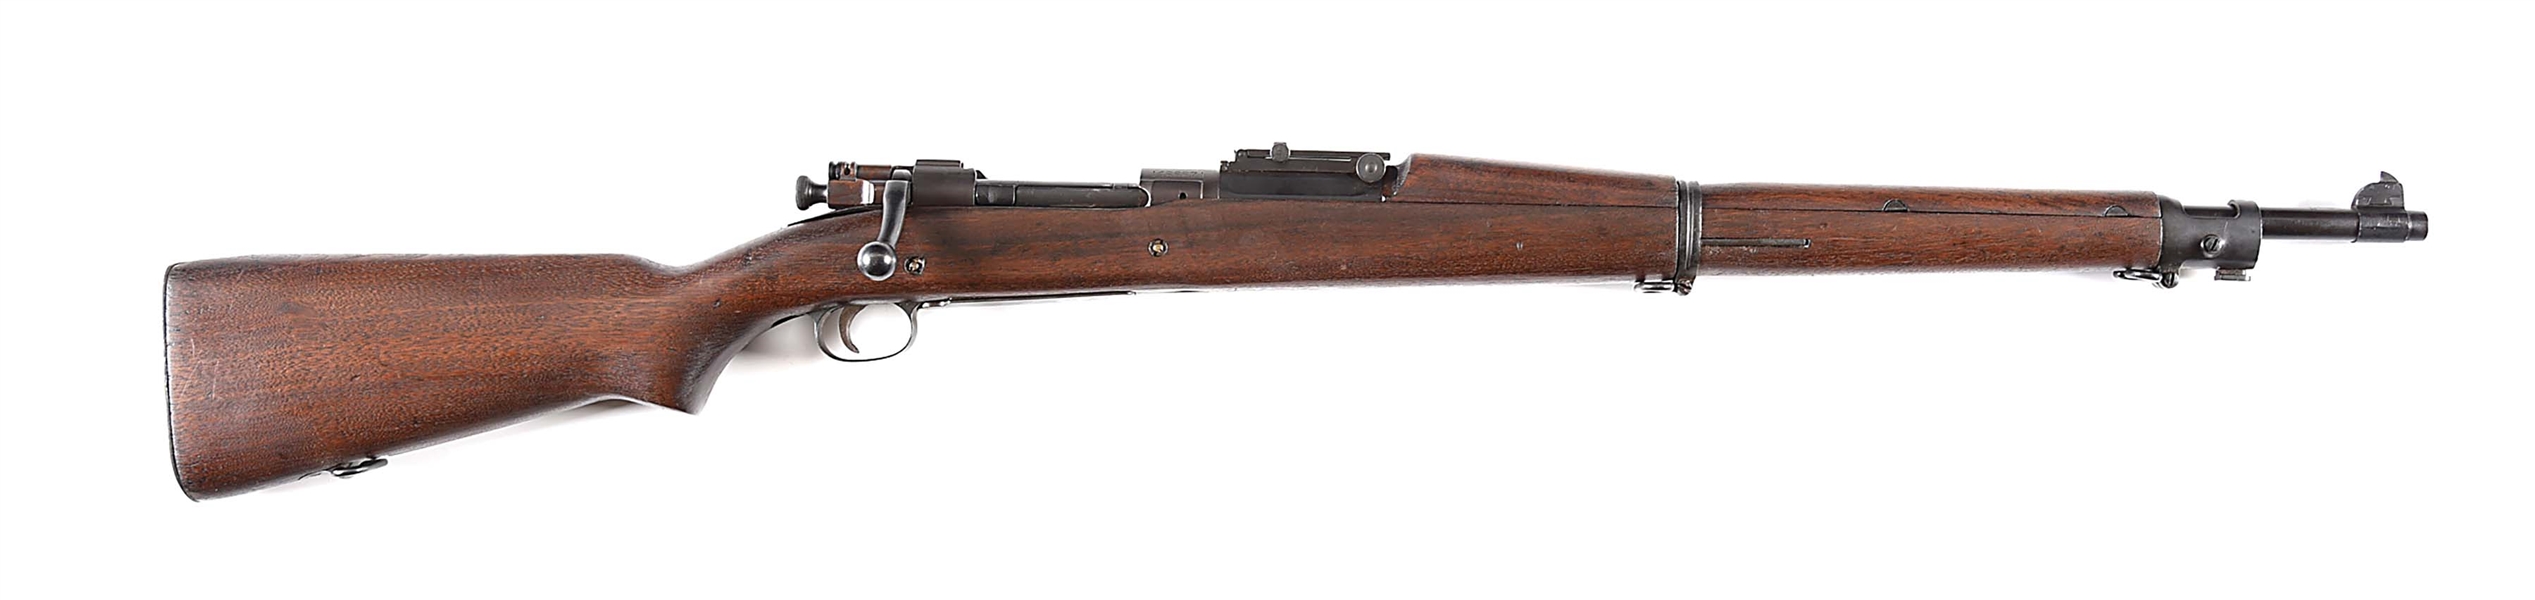 (C) US SPRINGFIELD MODEL 1903 A1 BOLT ACTION RIFLE.